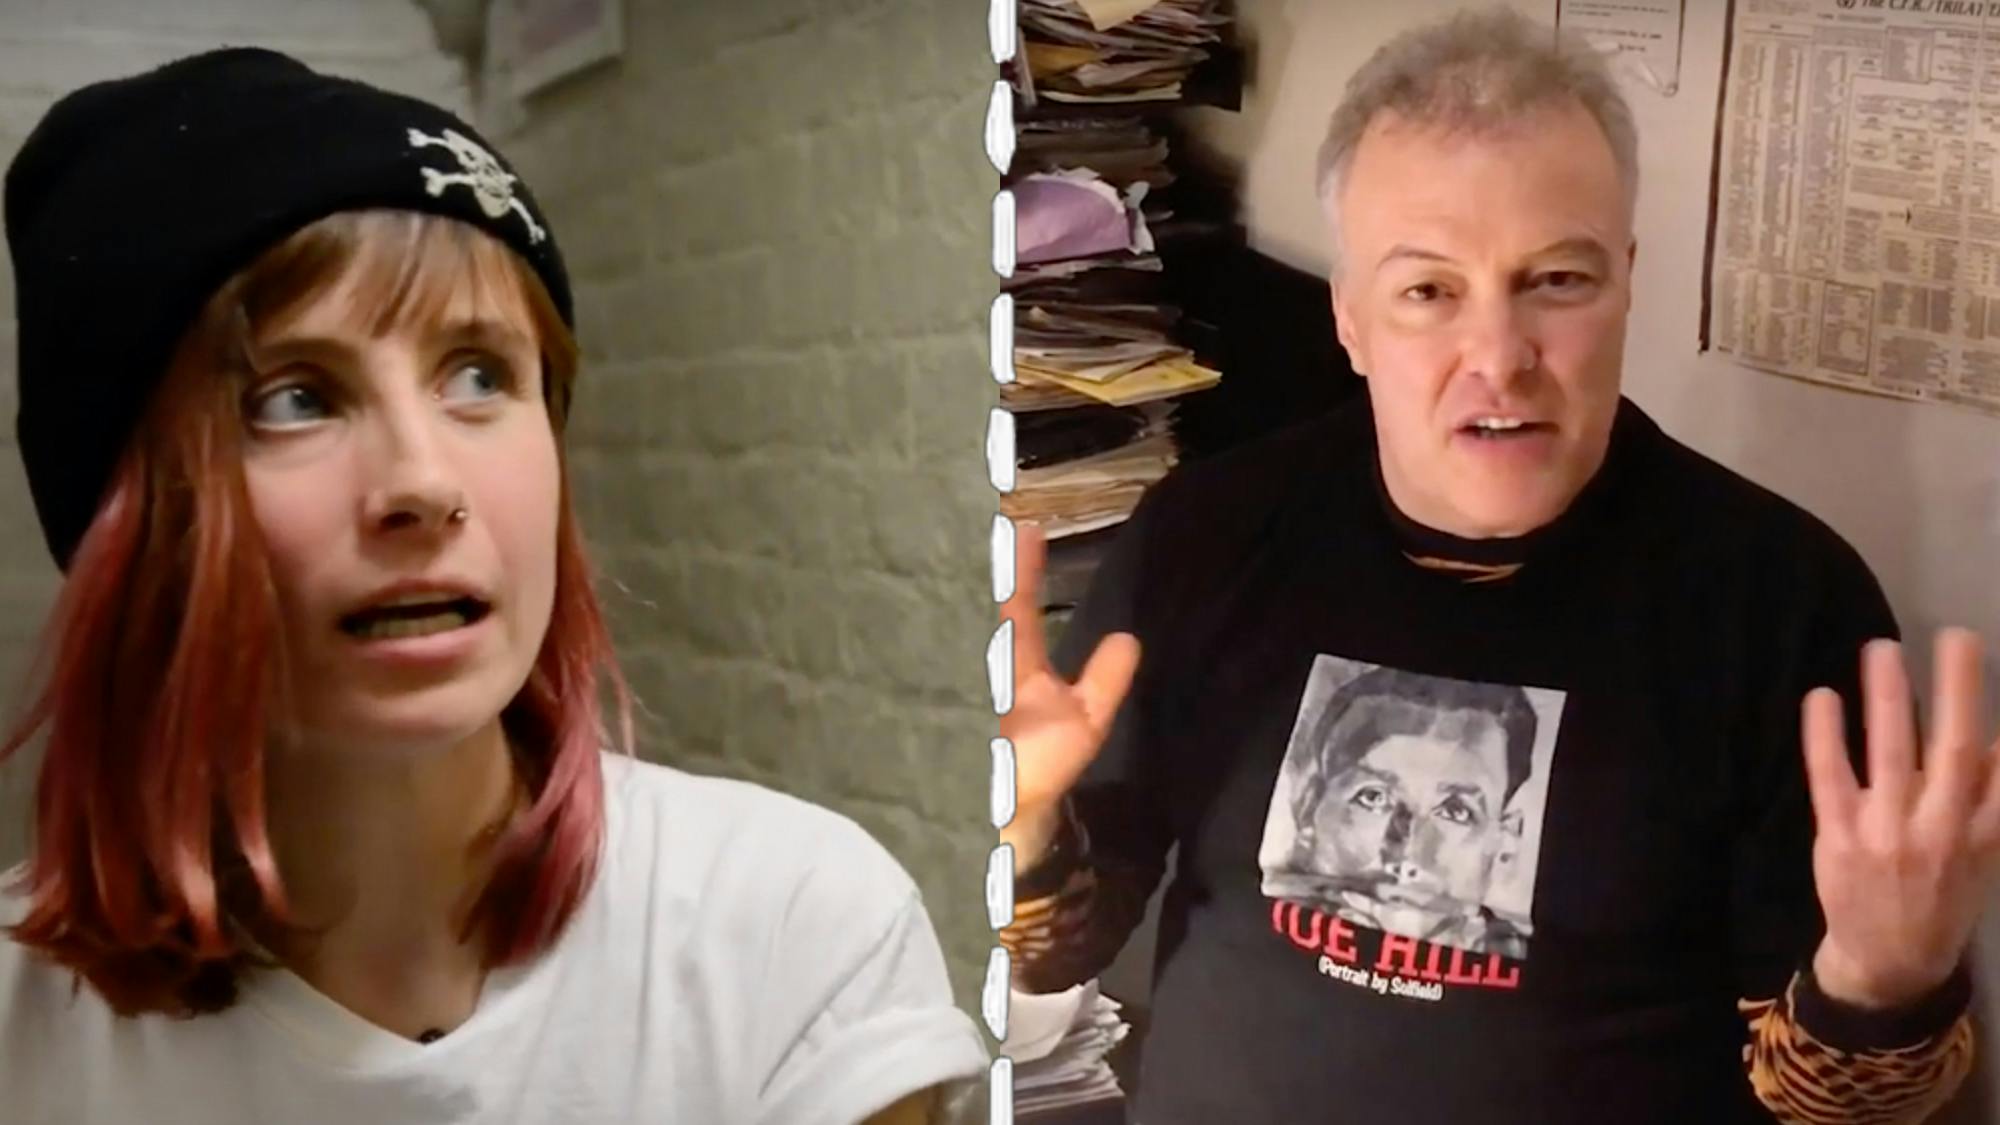 Punks Unite To Support Campaign Against The Use Of Sweatshop T-Shirts